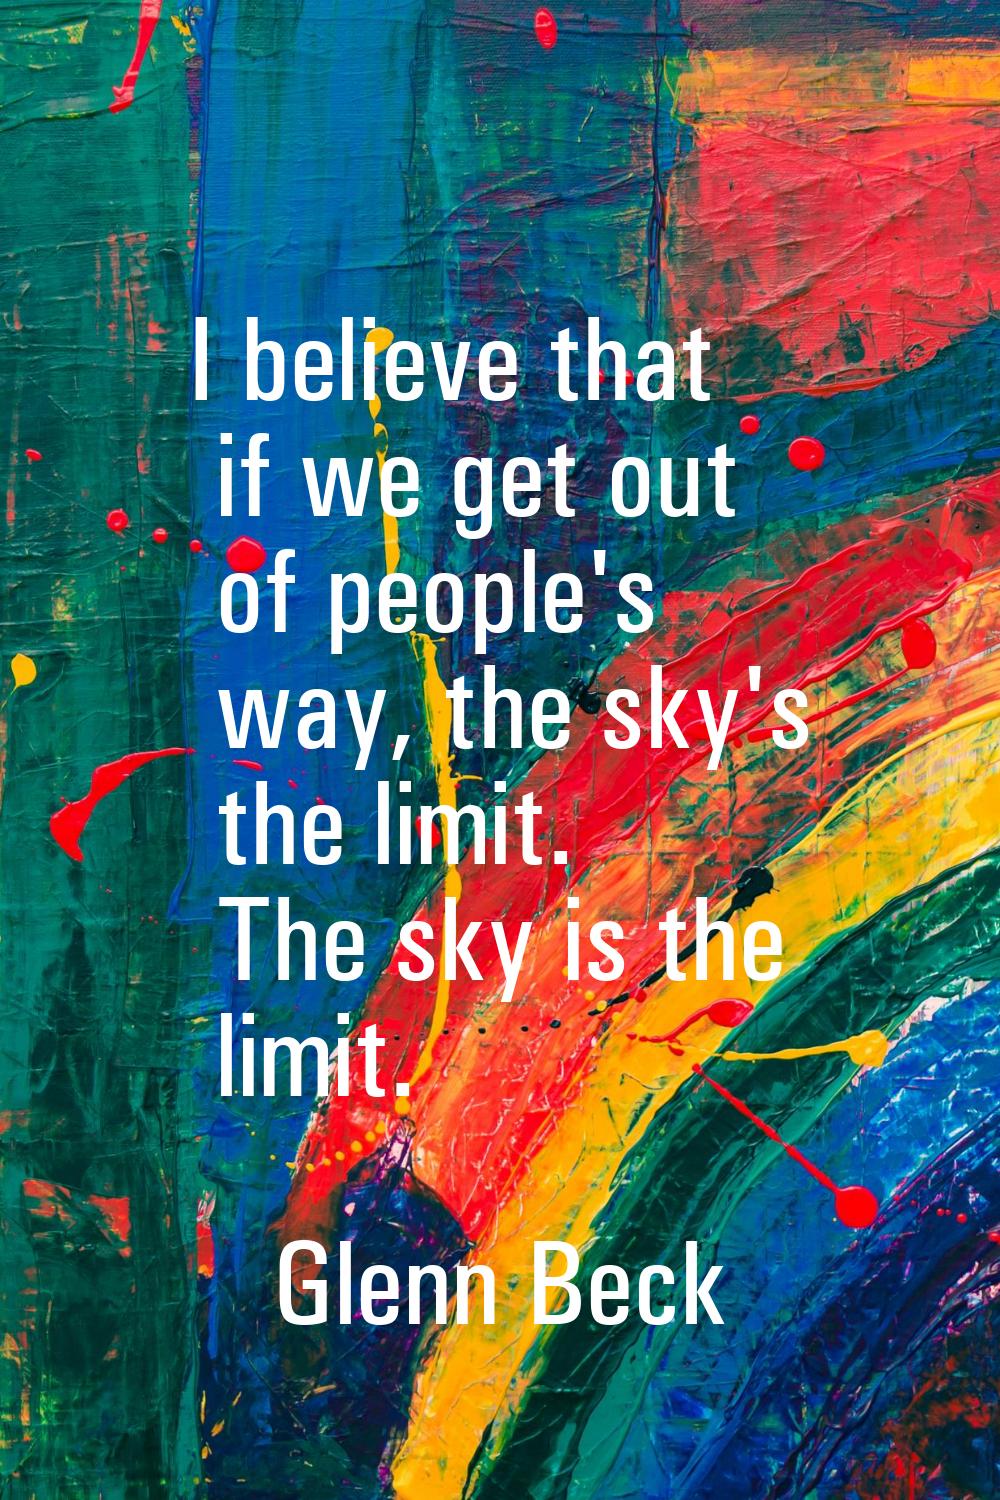 I believe that if we get out of people's way, the sky's the limit. The sky is the limit.